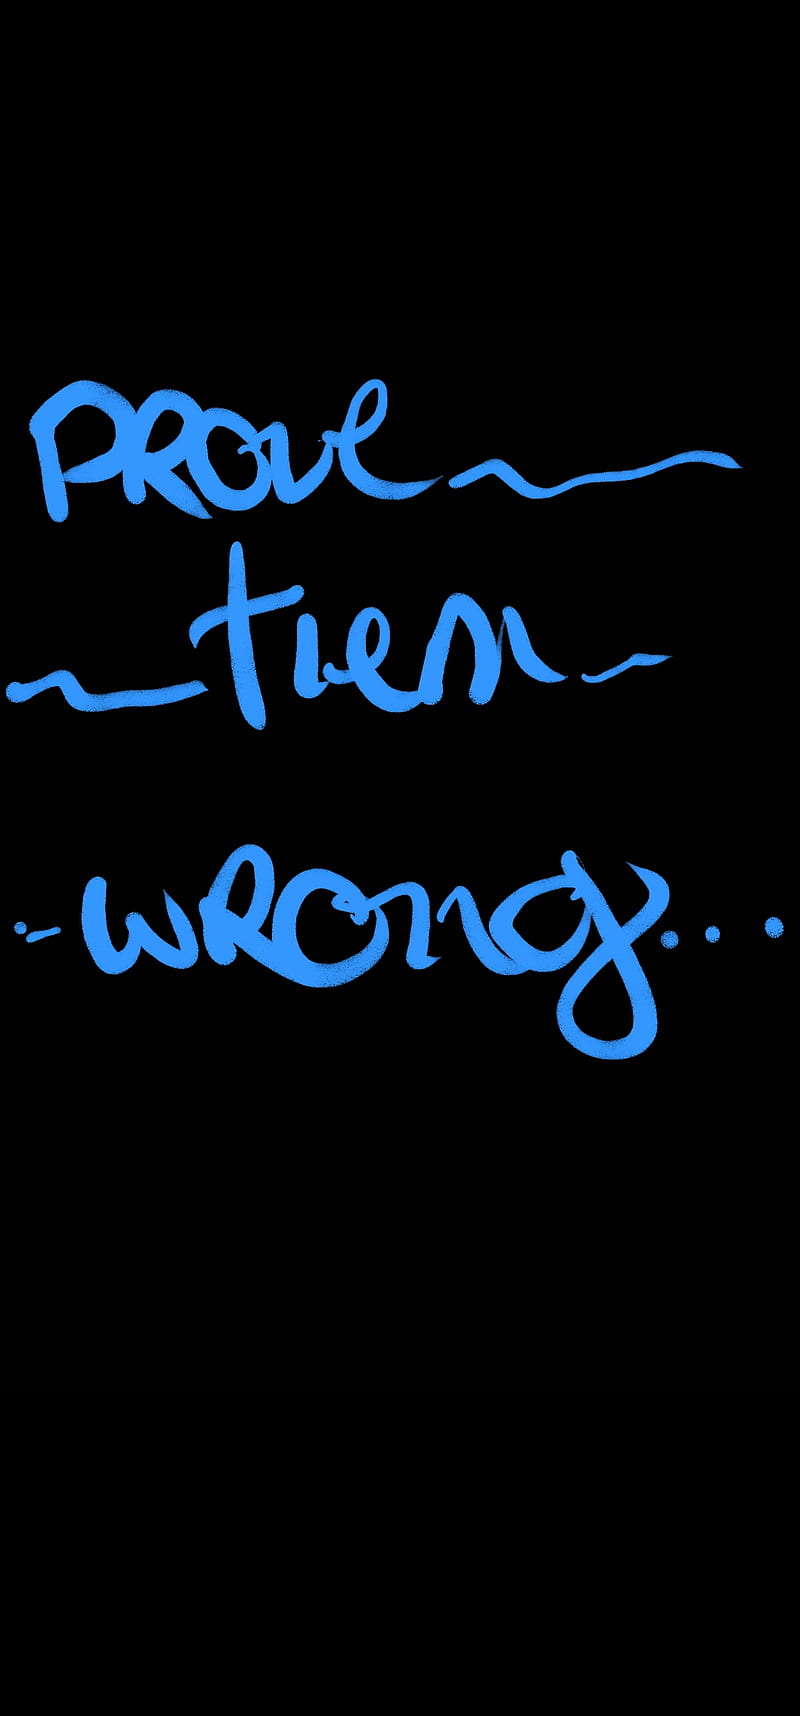 Prove them wrong calligraphy inspire quote text HD phone wallpaper   Peakpx